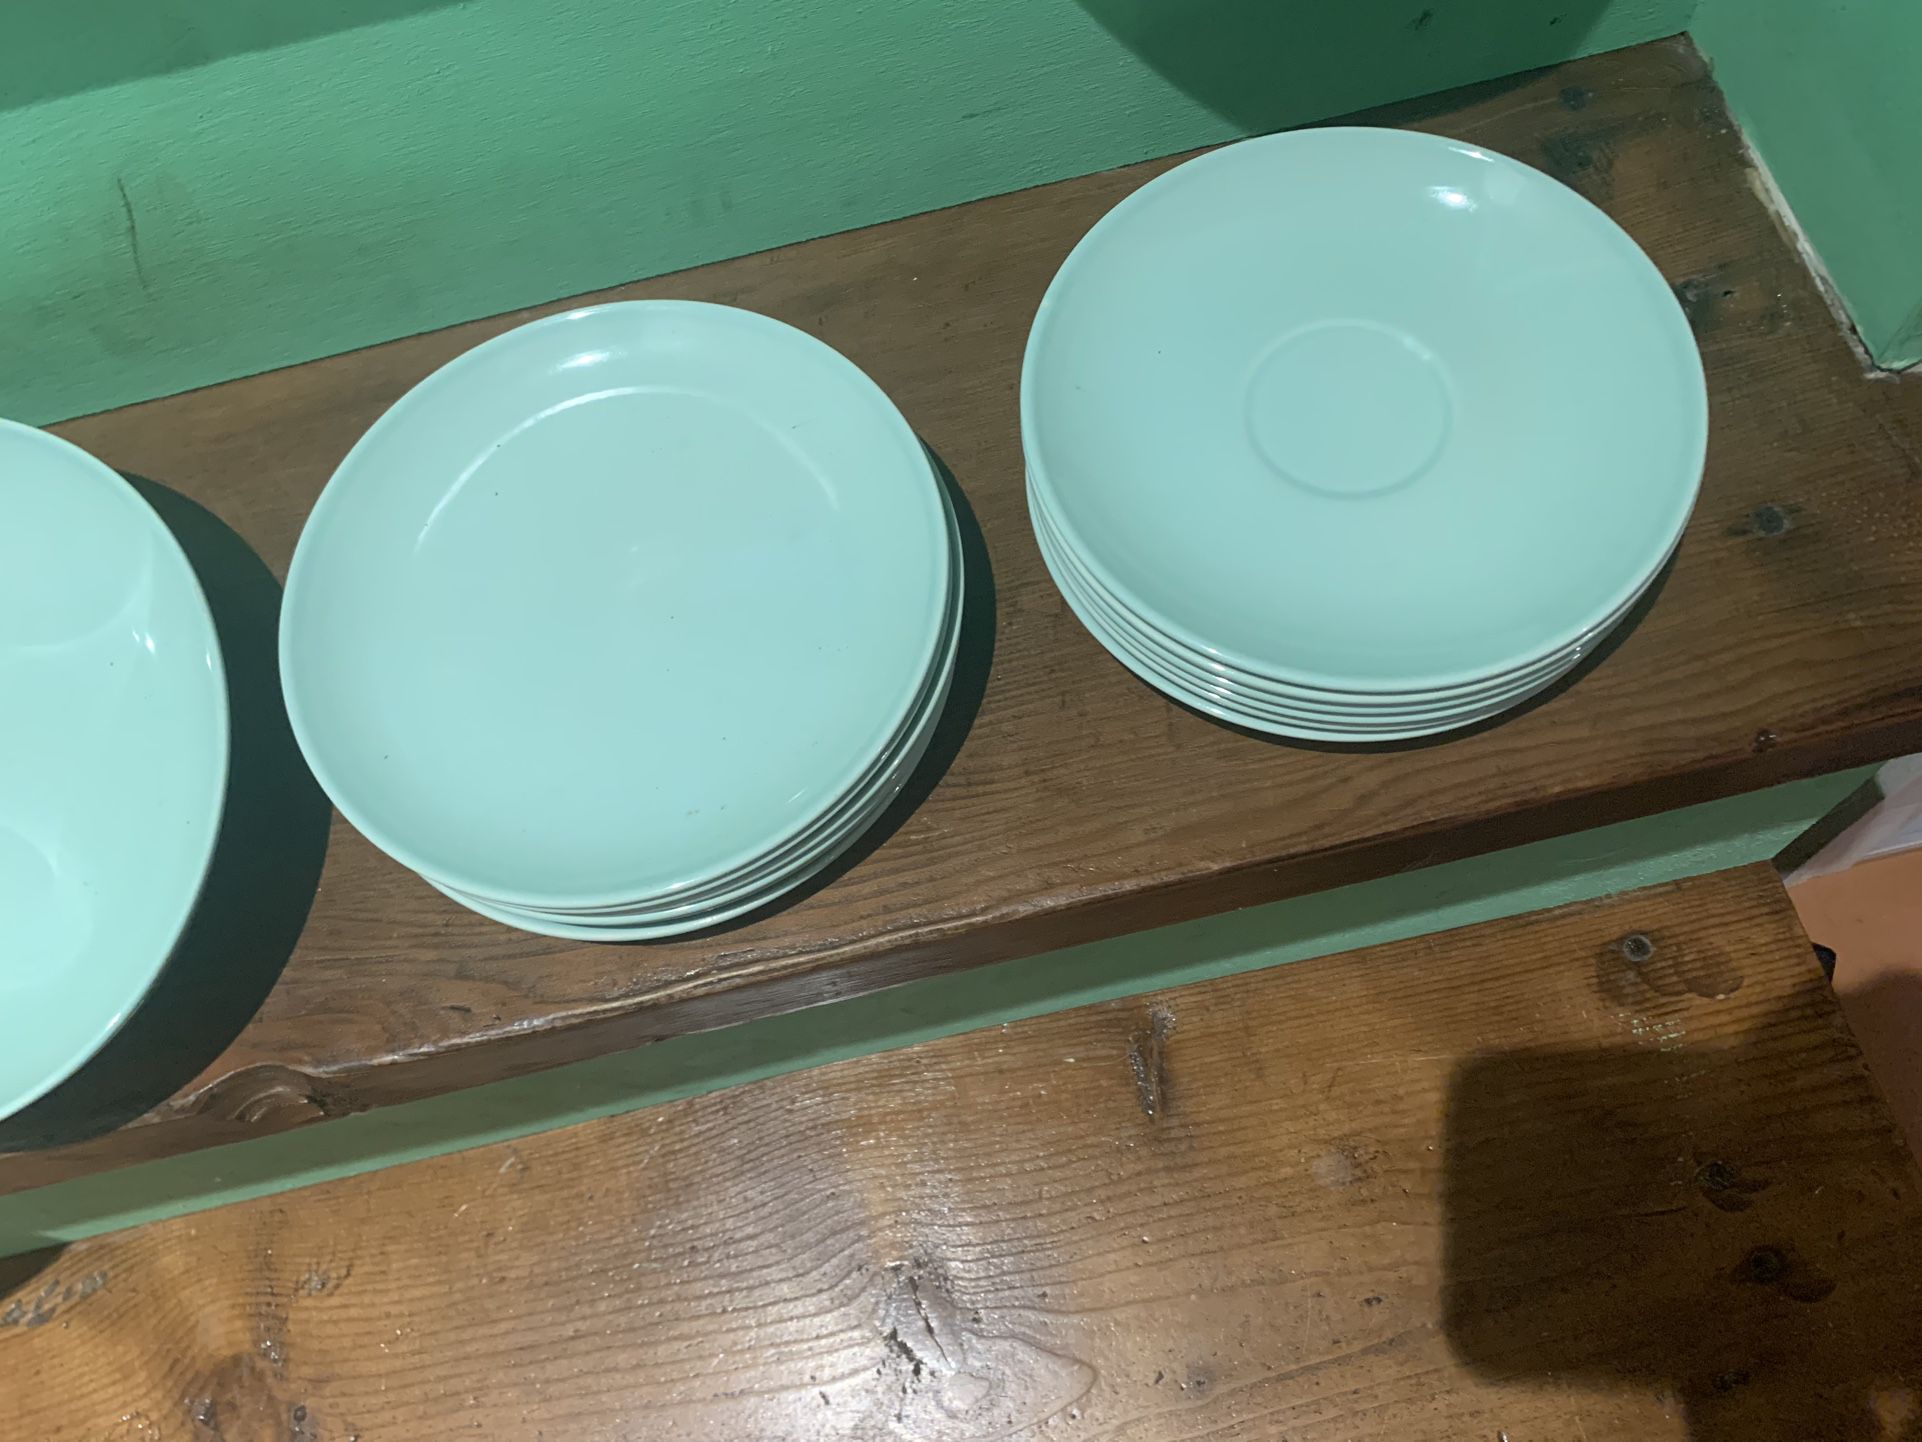 Old Taylor, Smith, And Taylor Dish Set